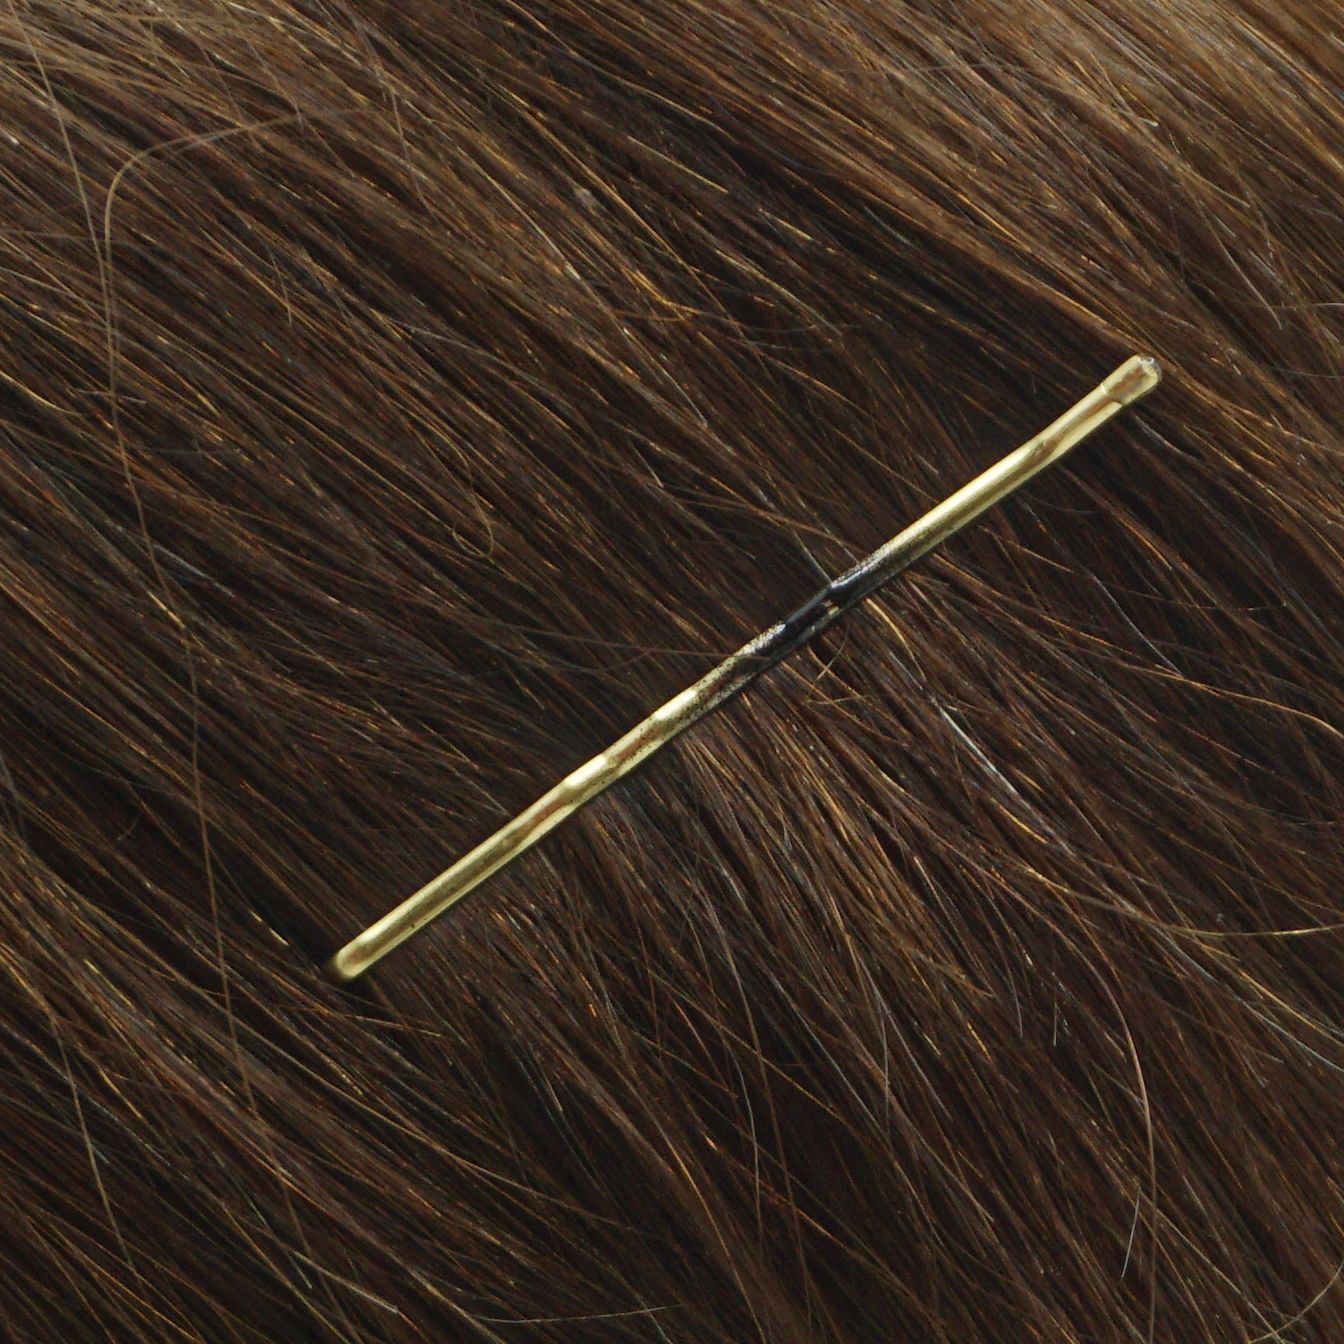 280, Tortoise Shell Color (Brassed/Black), 2.4in (6.0cm), Italian Made Bobby Pins, Recloseable Stay Clean and Organized Container